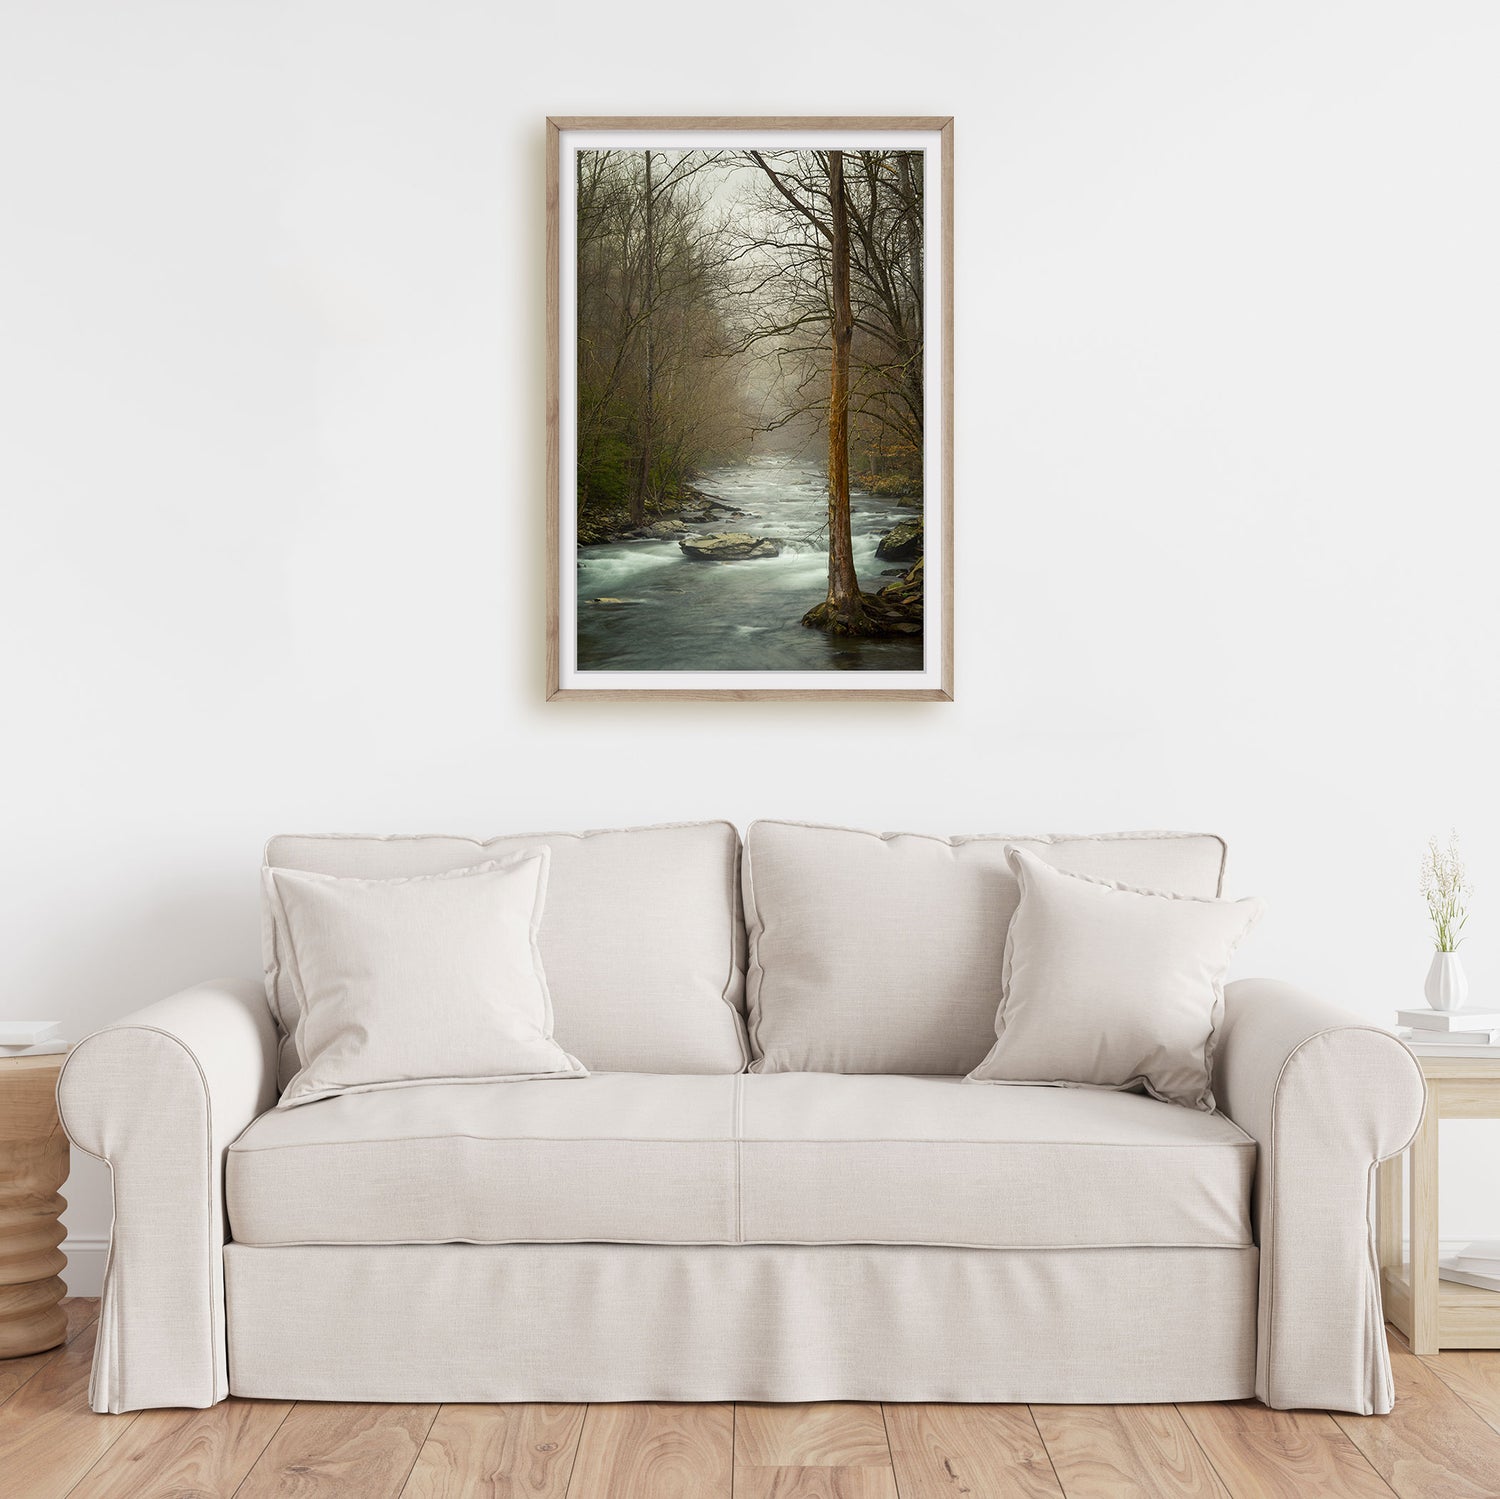 Featuring the misty vistas of the Great Smoky Mountains National Park, this photography print is a testament to the park&#39;s enduring allure as a subject of nature wall art.